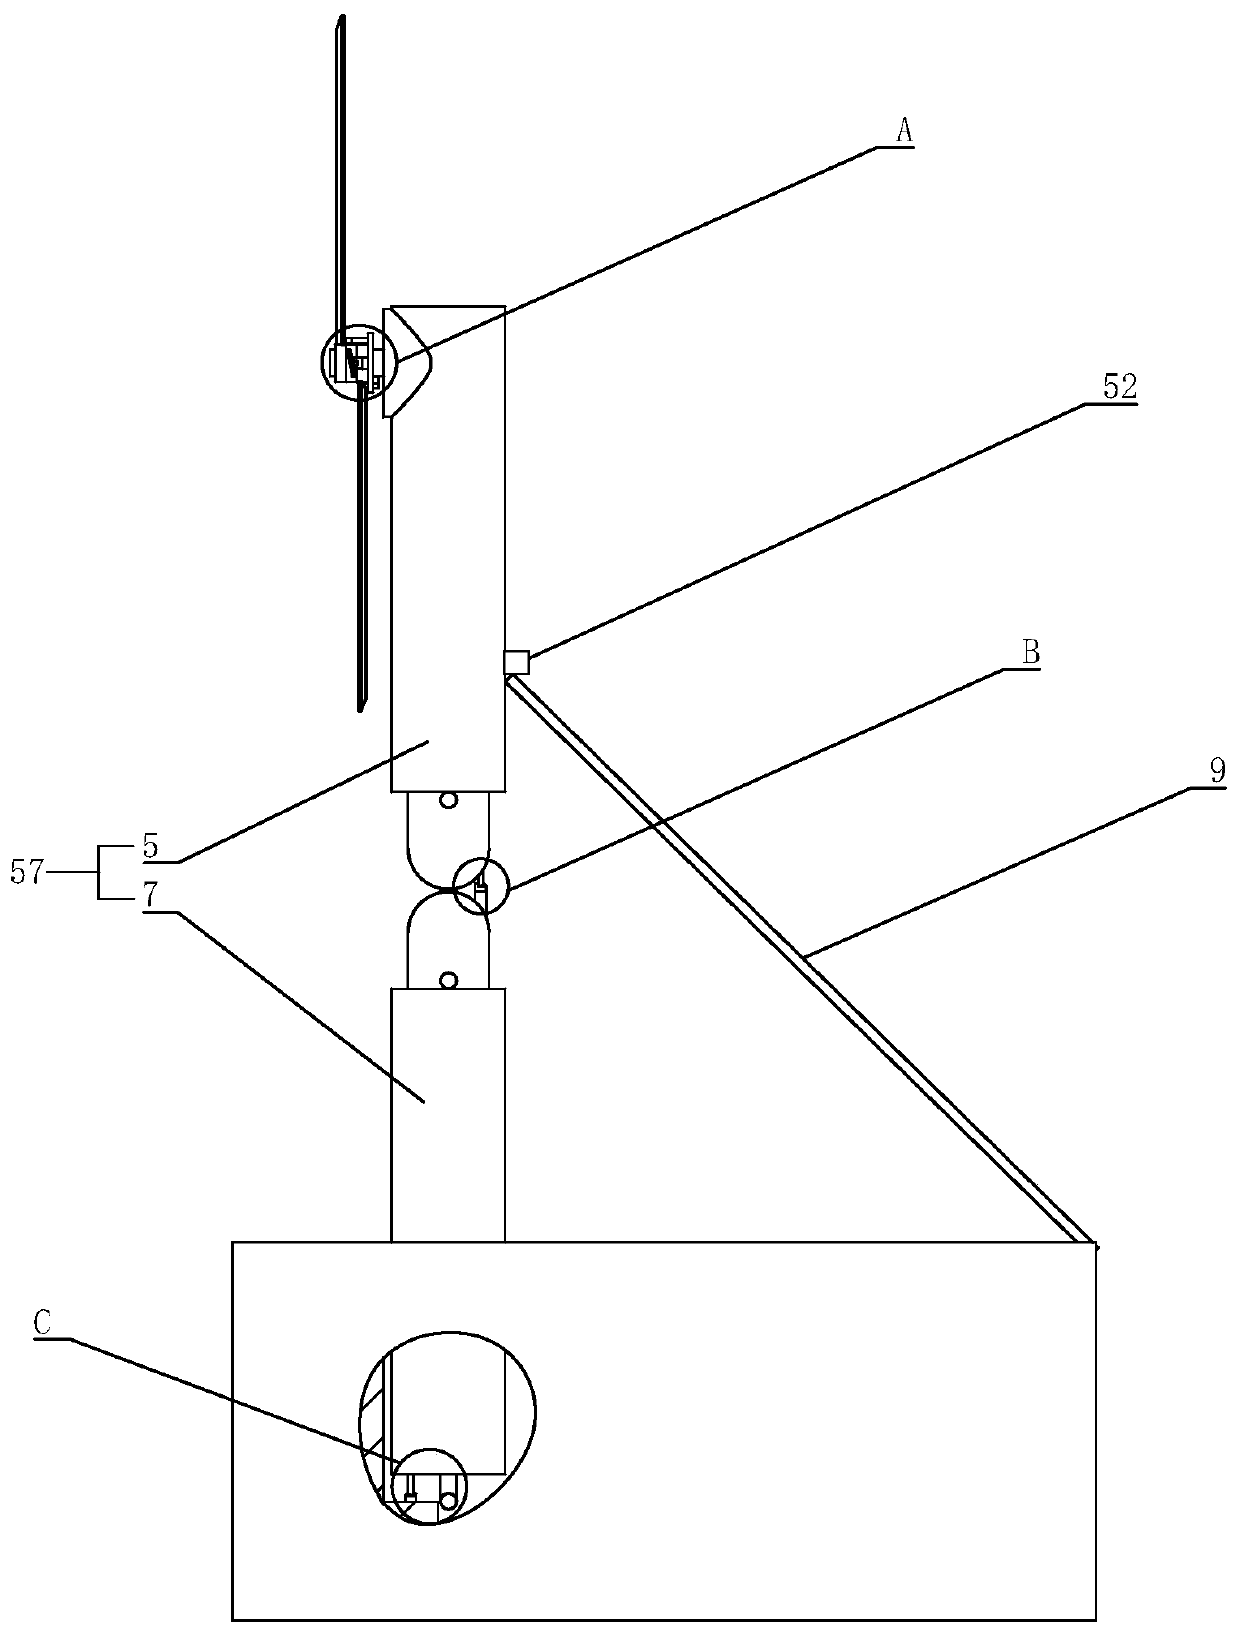 Wind driven generator with overlapped fan blades and generating device comprising generator